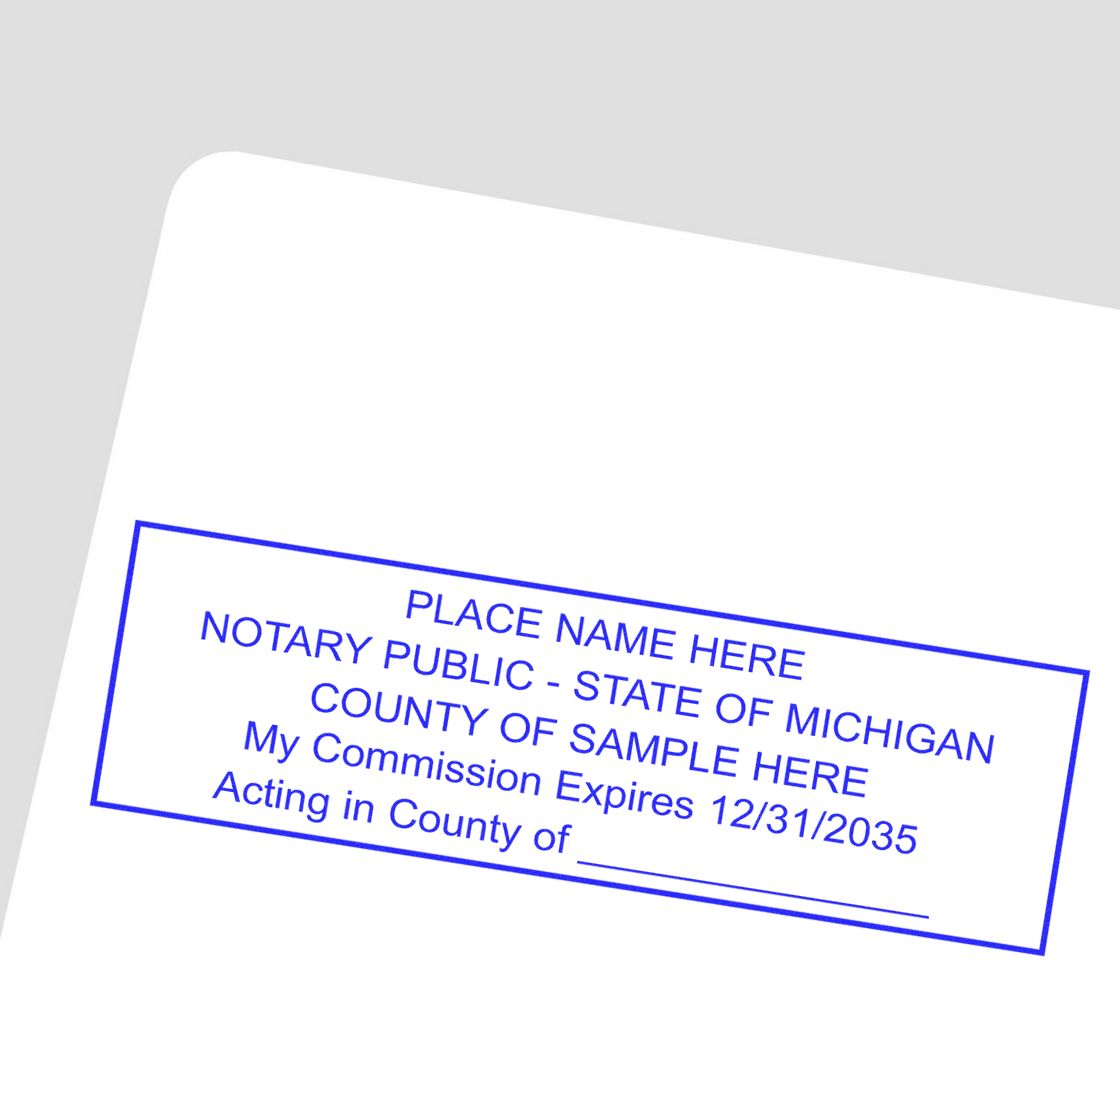 The MaxLight Premium Pre-Inked Michigan State Seal Notarial Stamp stamp impression comes to life with a crisp, detailed photo on paper - showcasing true professional quality.